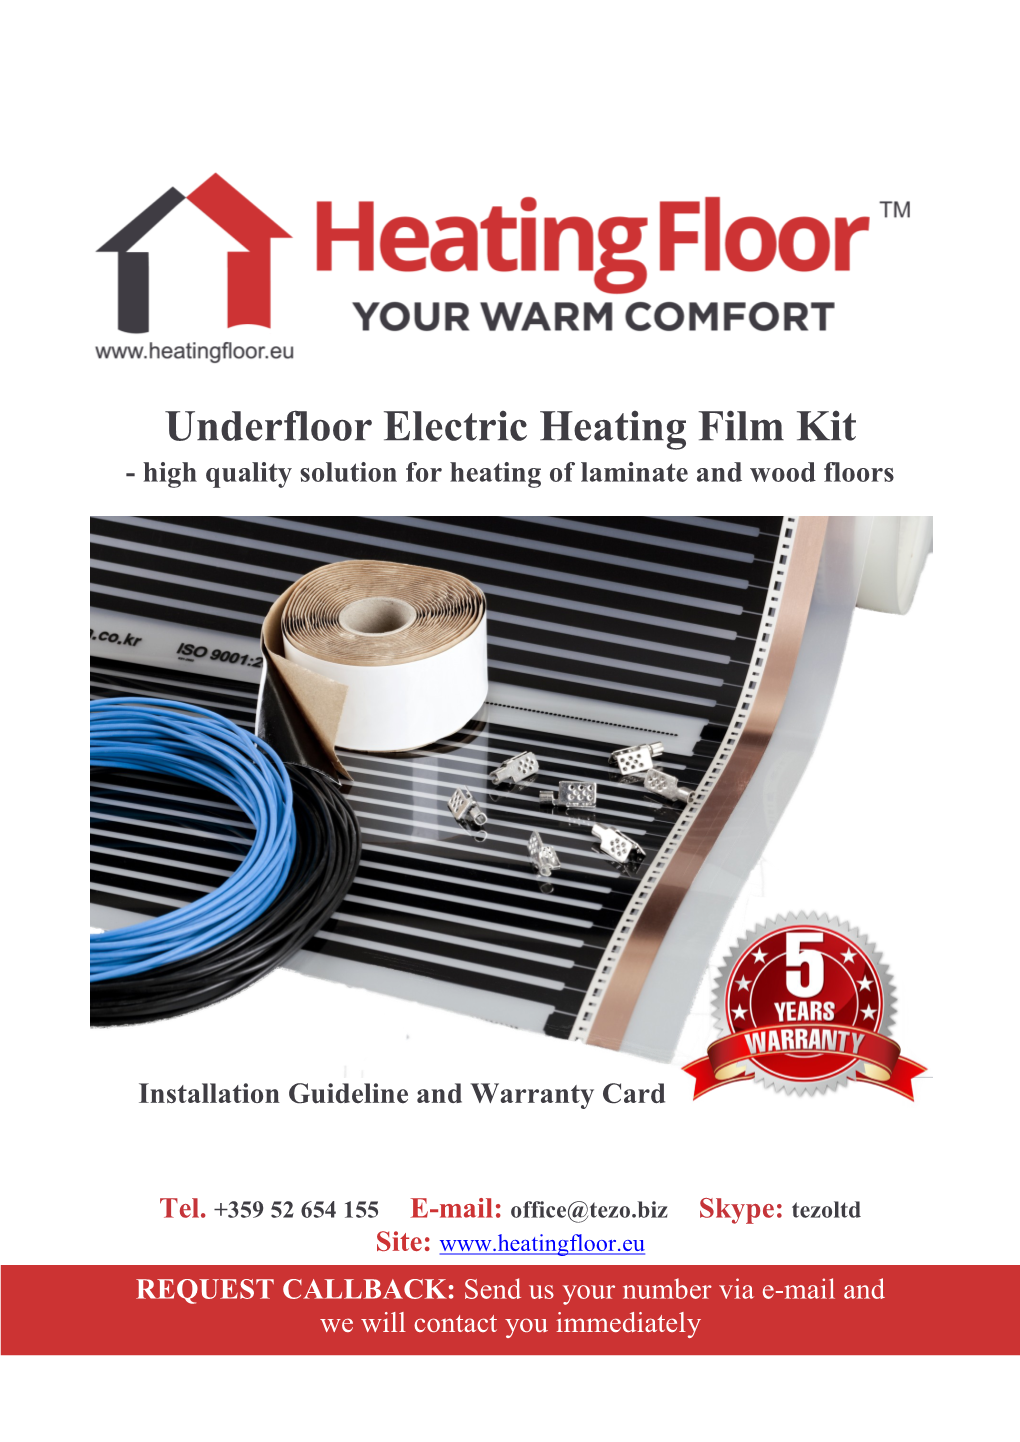 Underfloor Electric Heating Film Kit - High Quality Solution for Heating of Laminate and Wood Floors